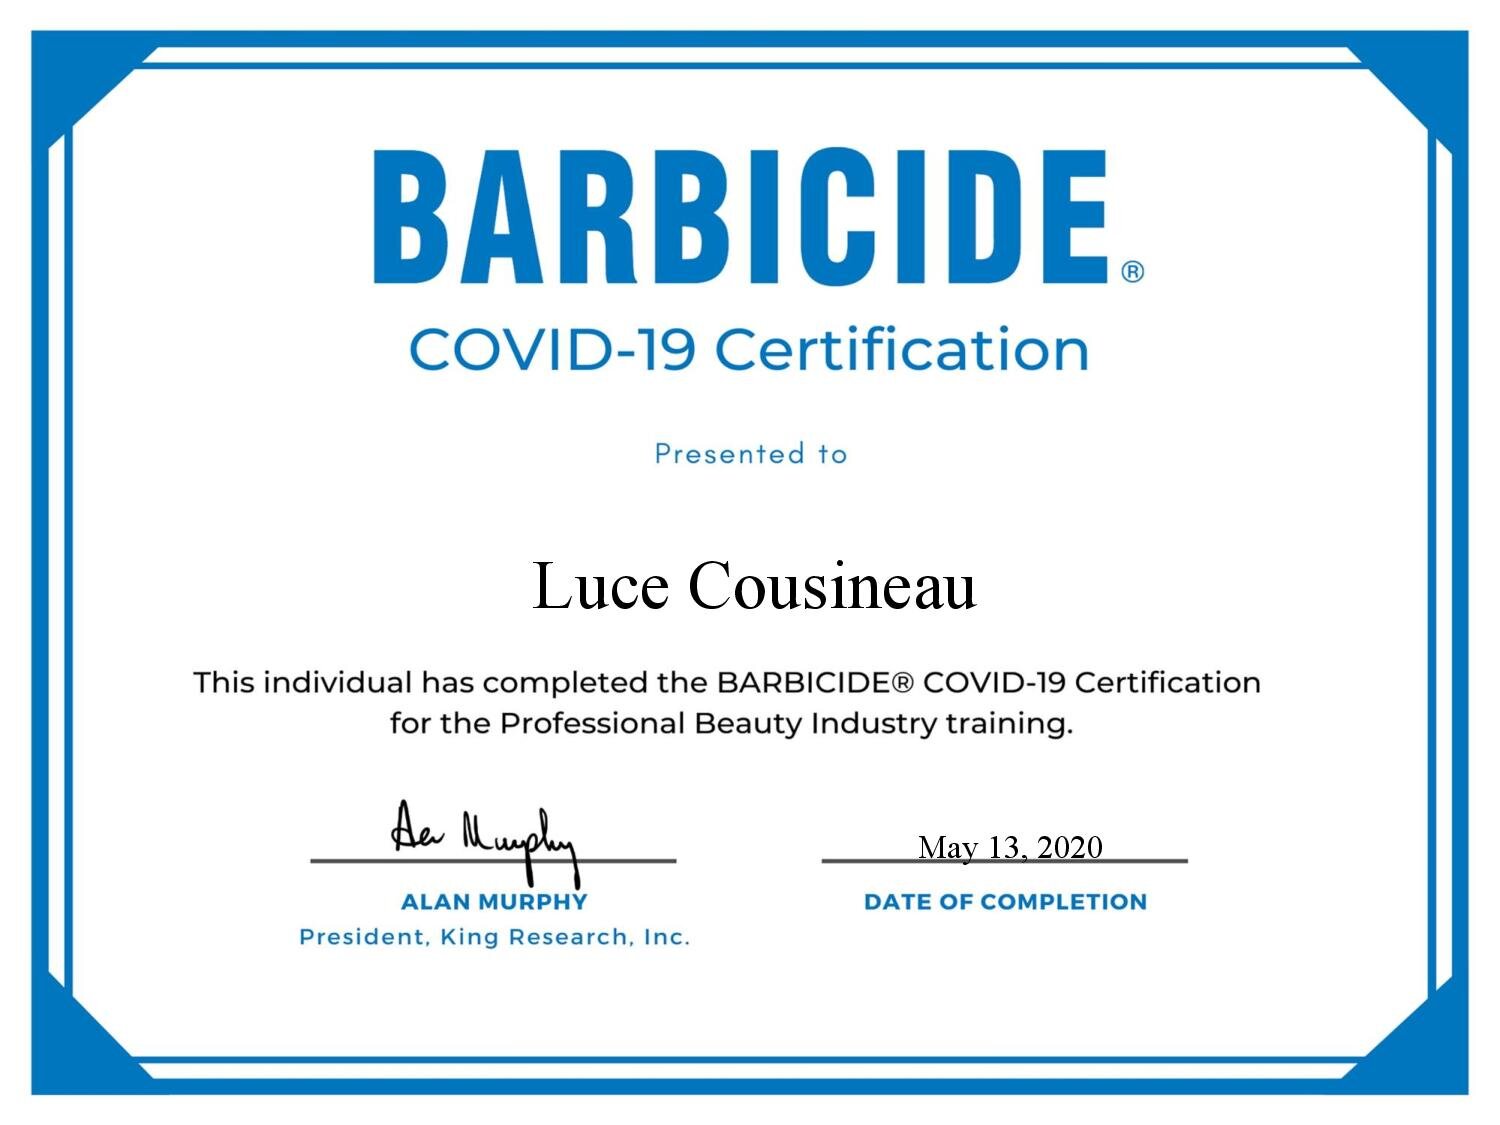 BARBICIDE COVID-19 Certificate for Luce Cousineau-page-001.jpg